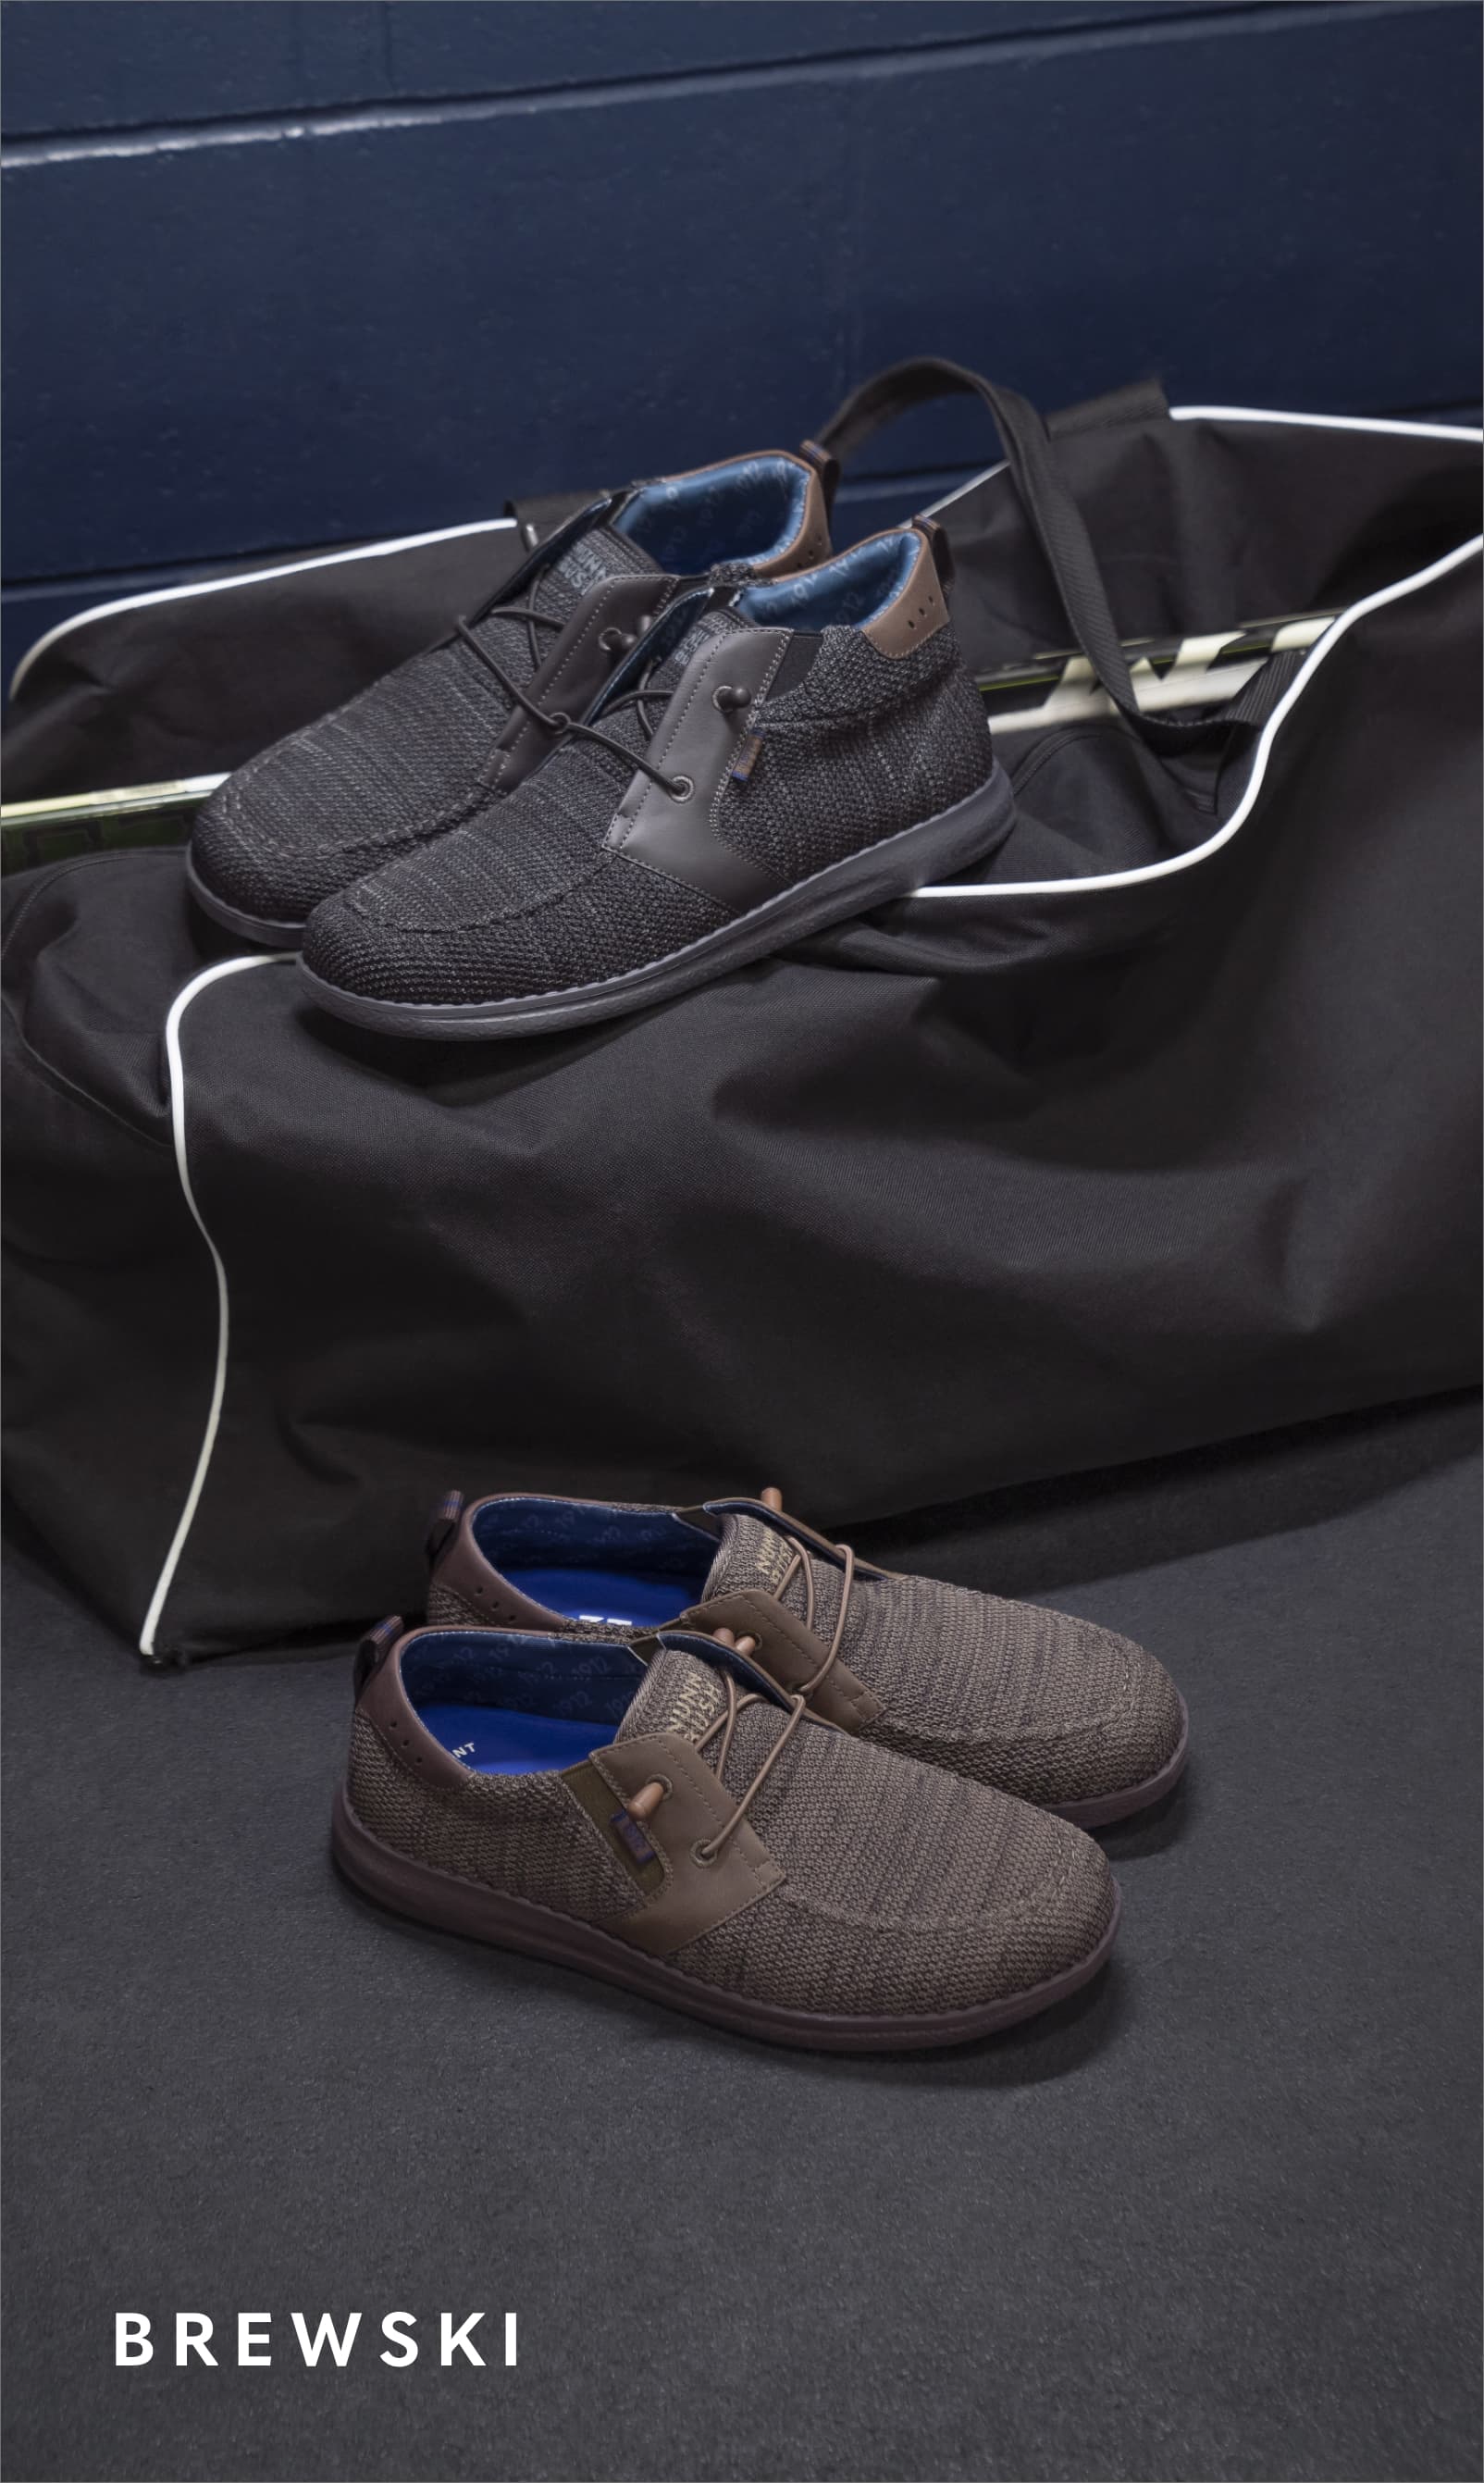 Men's Casual Shoes category. Image features the Brewski Knit.